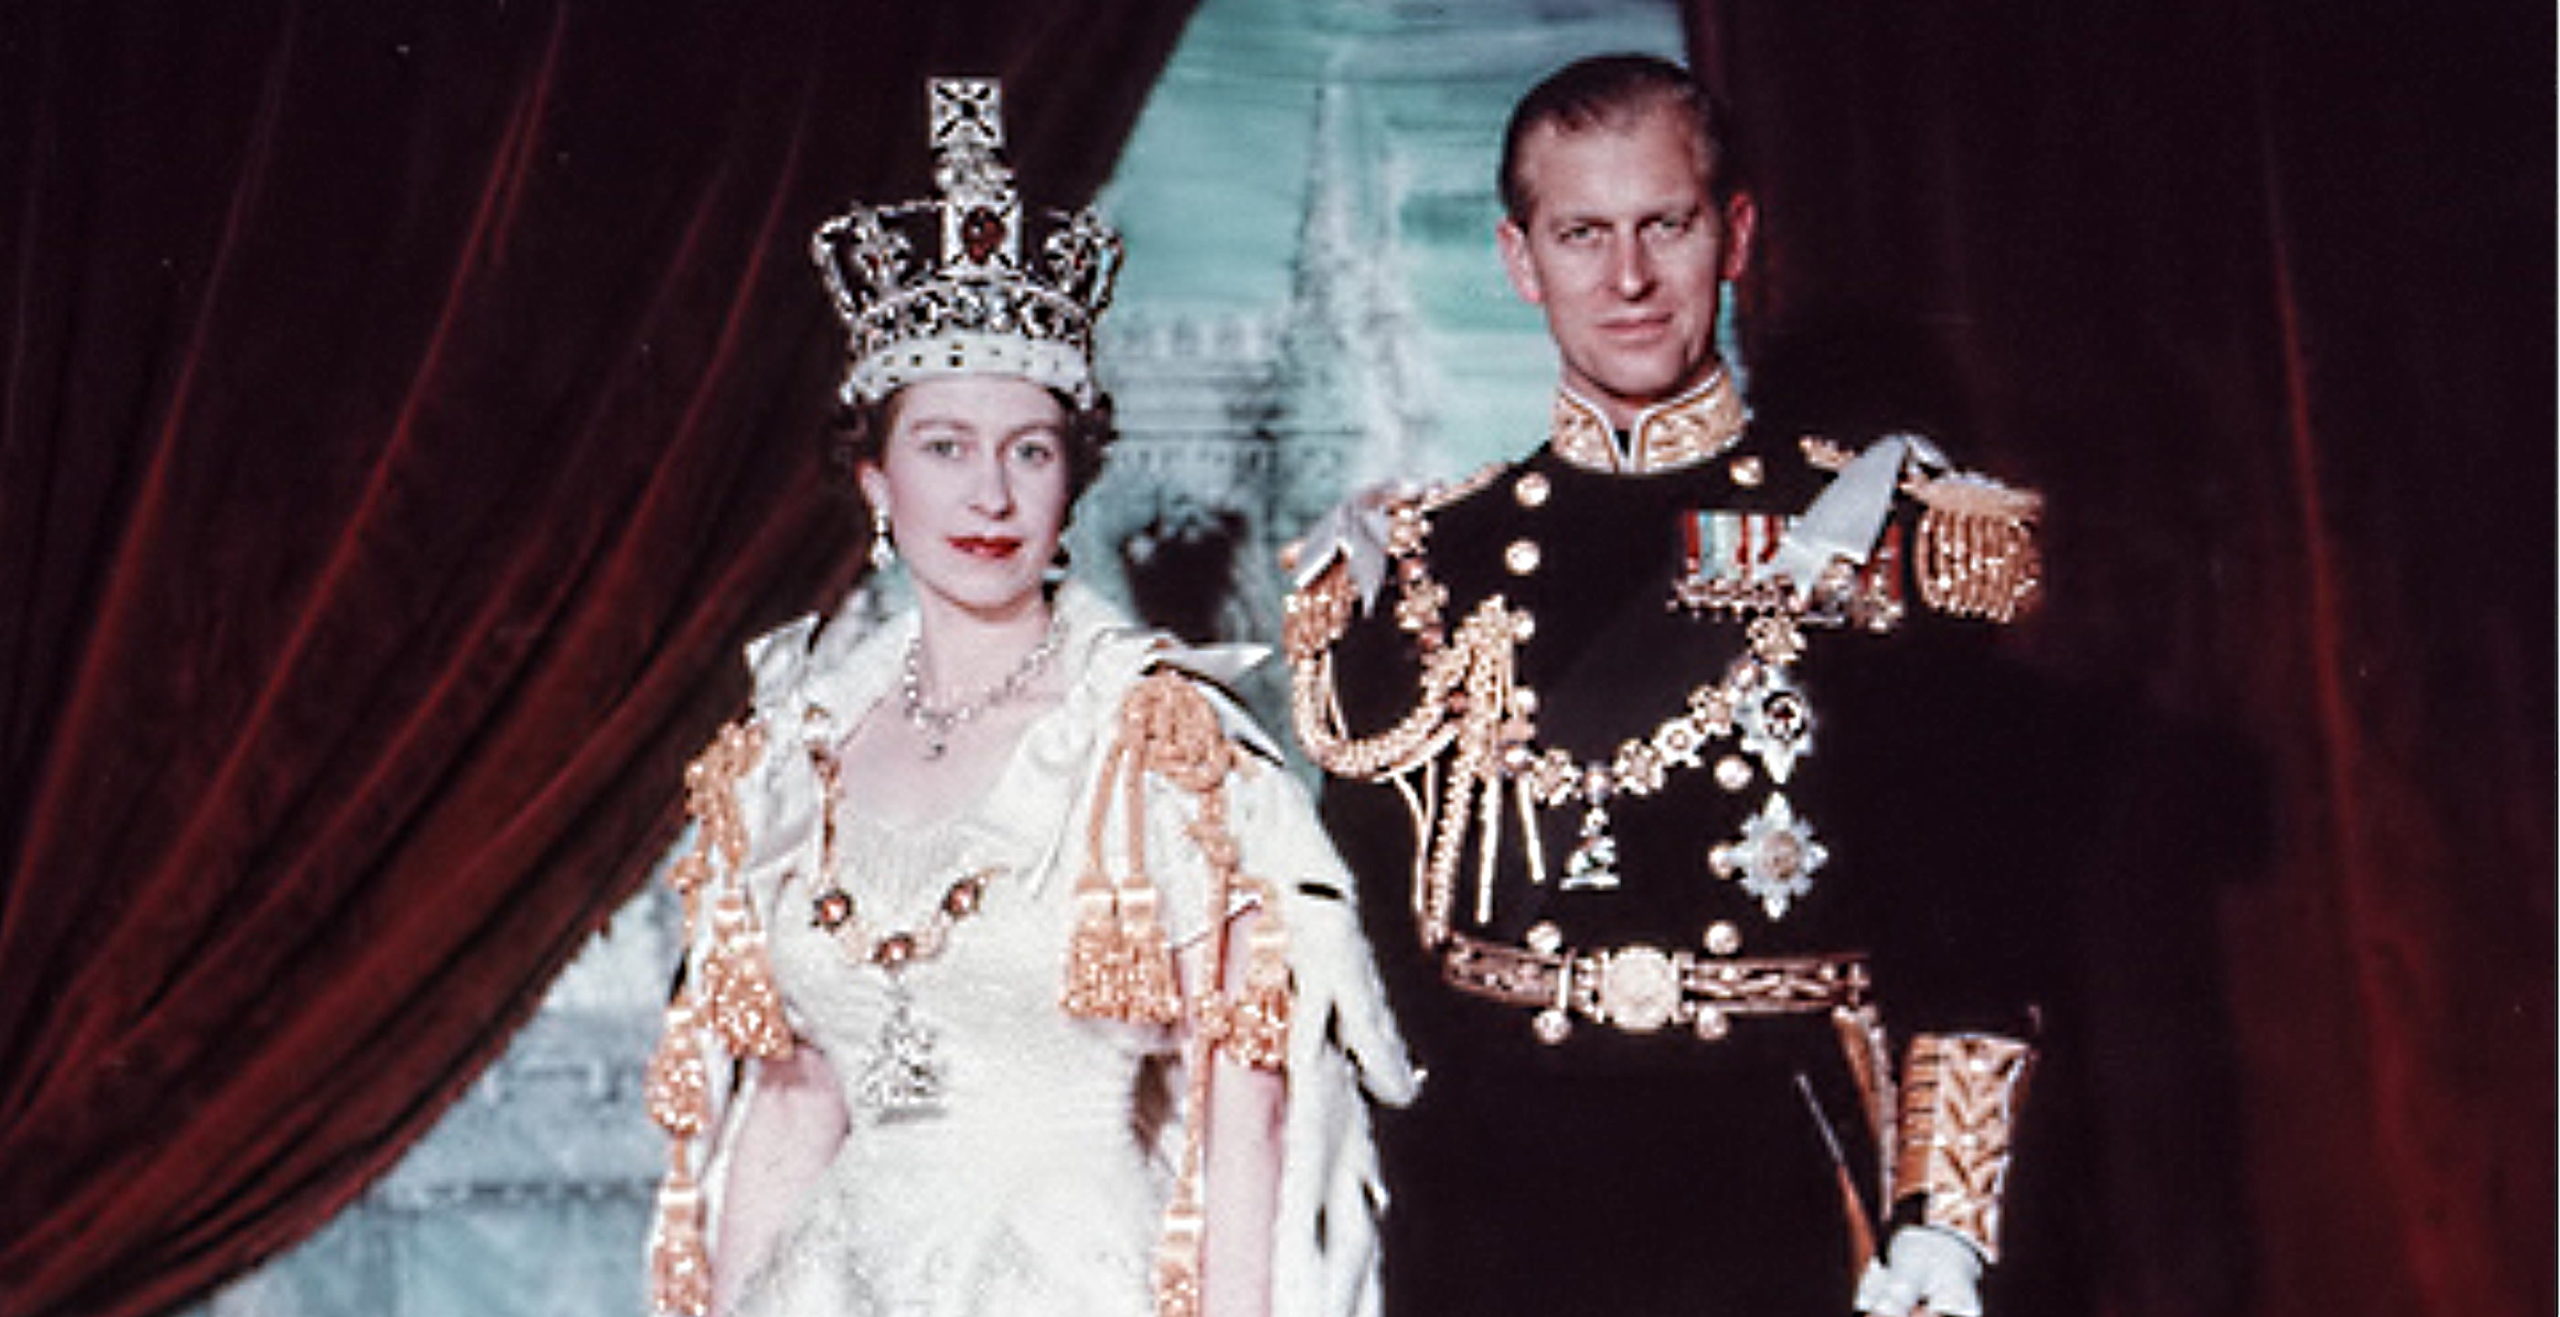 Fashion at the Coronation: What the guests wore